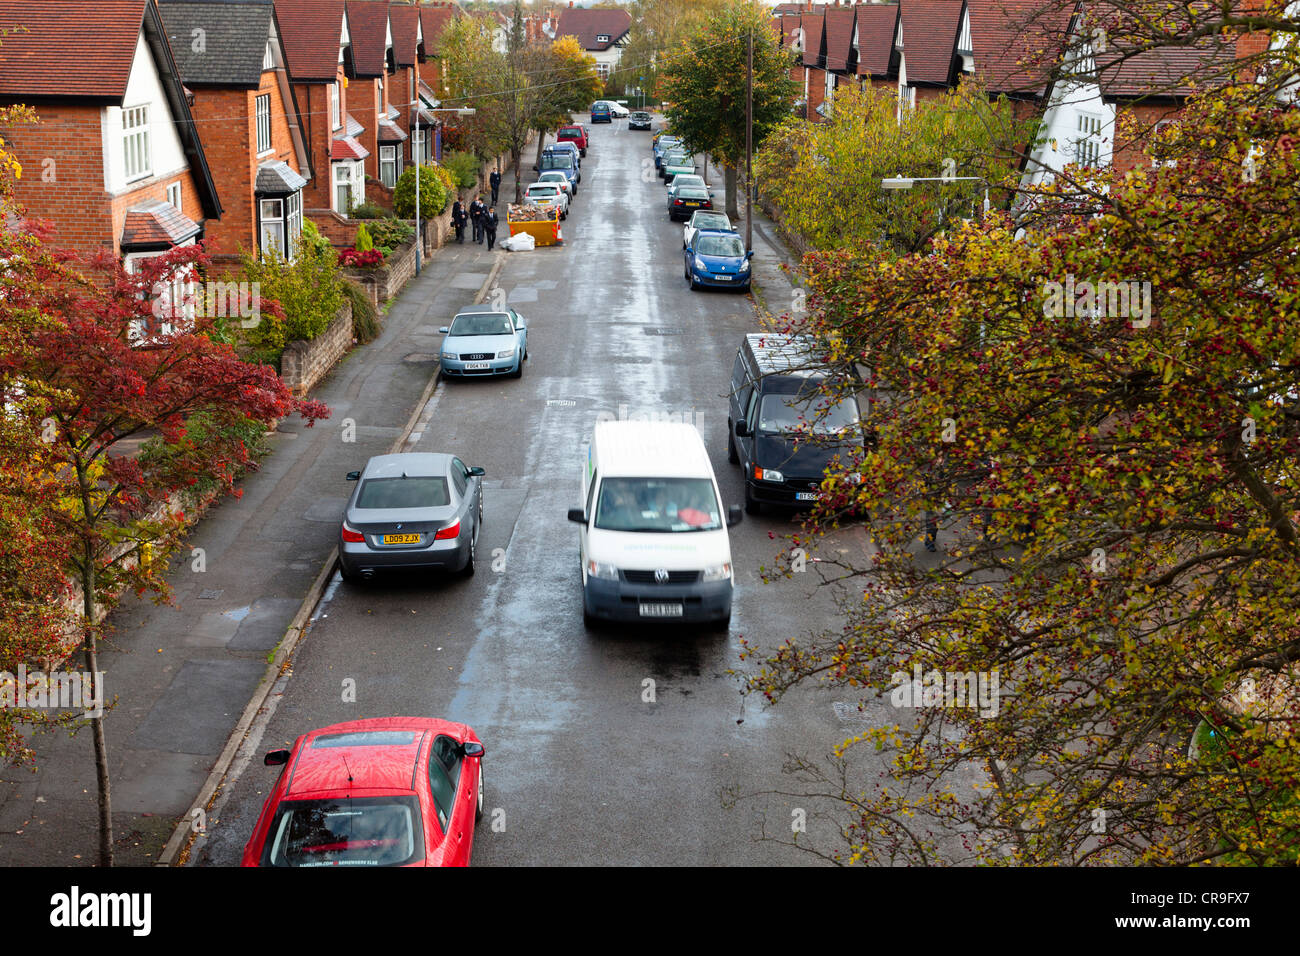 UK suburbs. Looking down at houses and roadside parking on a typical residential street, West Bridgford, Nottinghamshire, England, UK Stock Photo